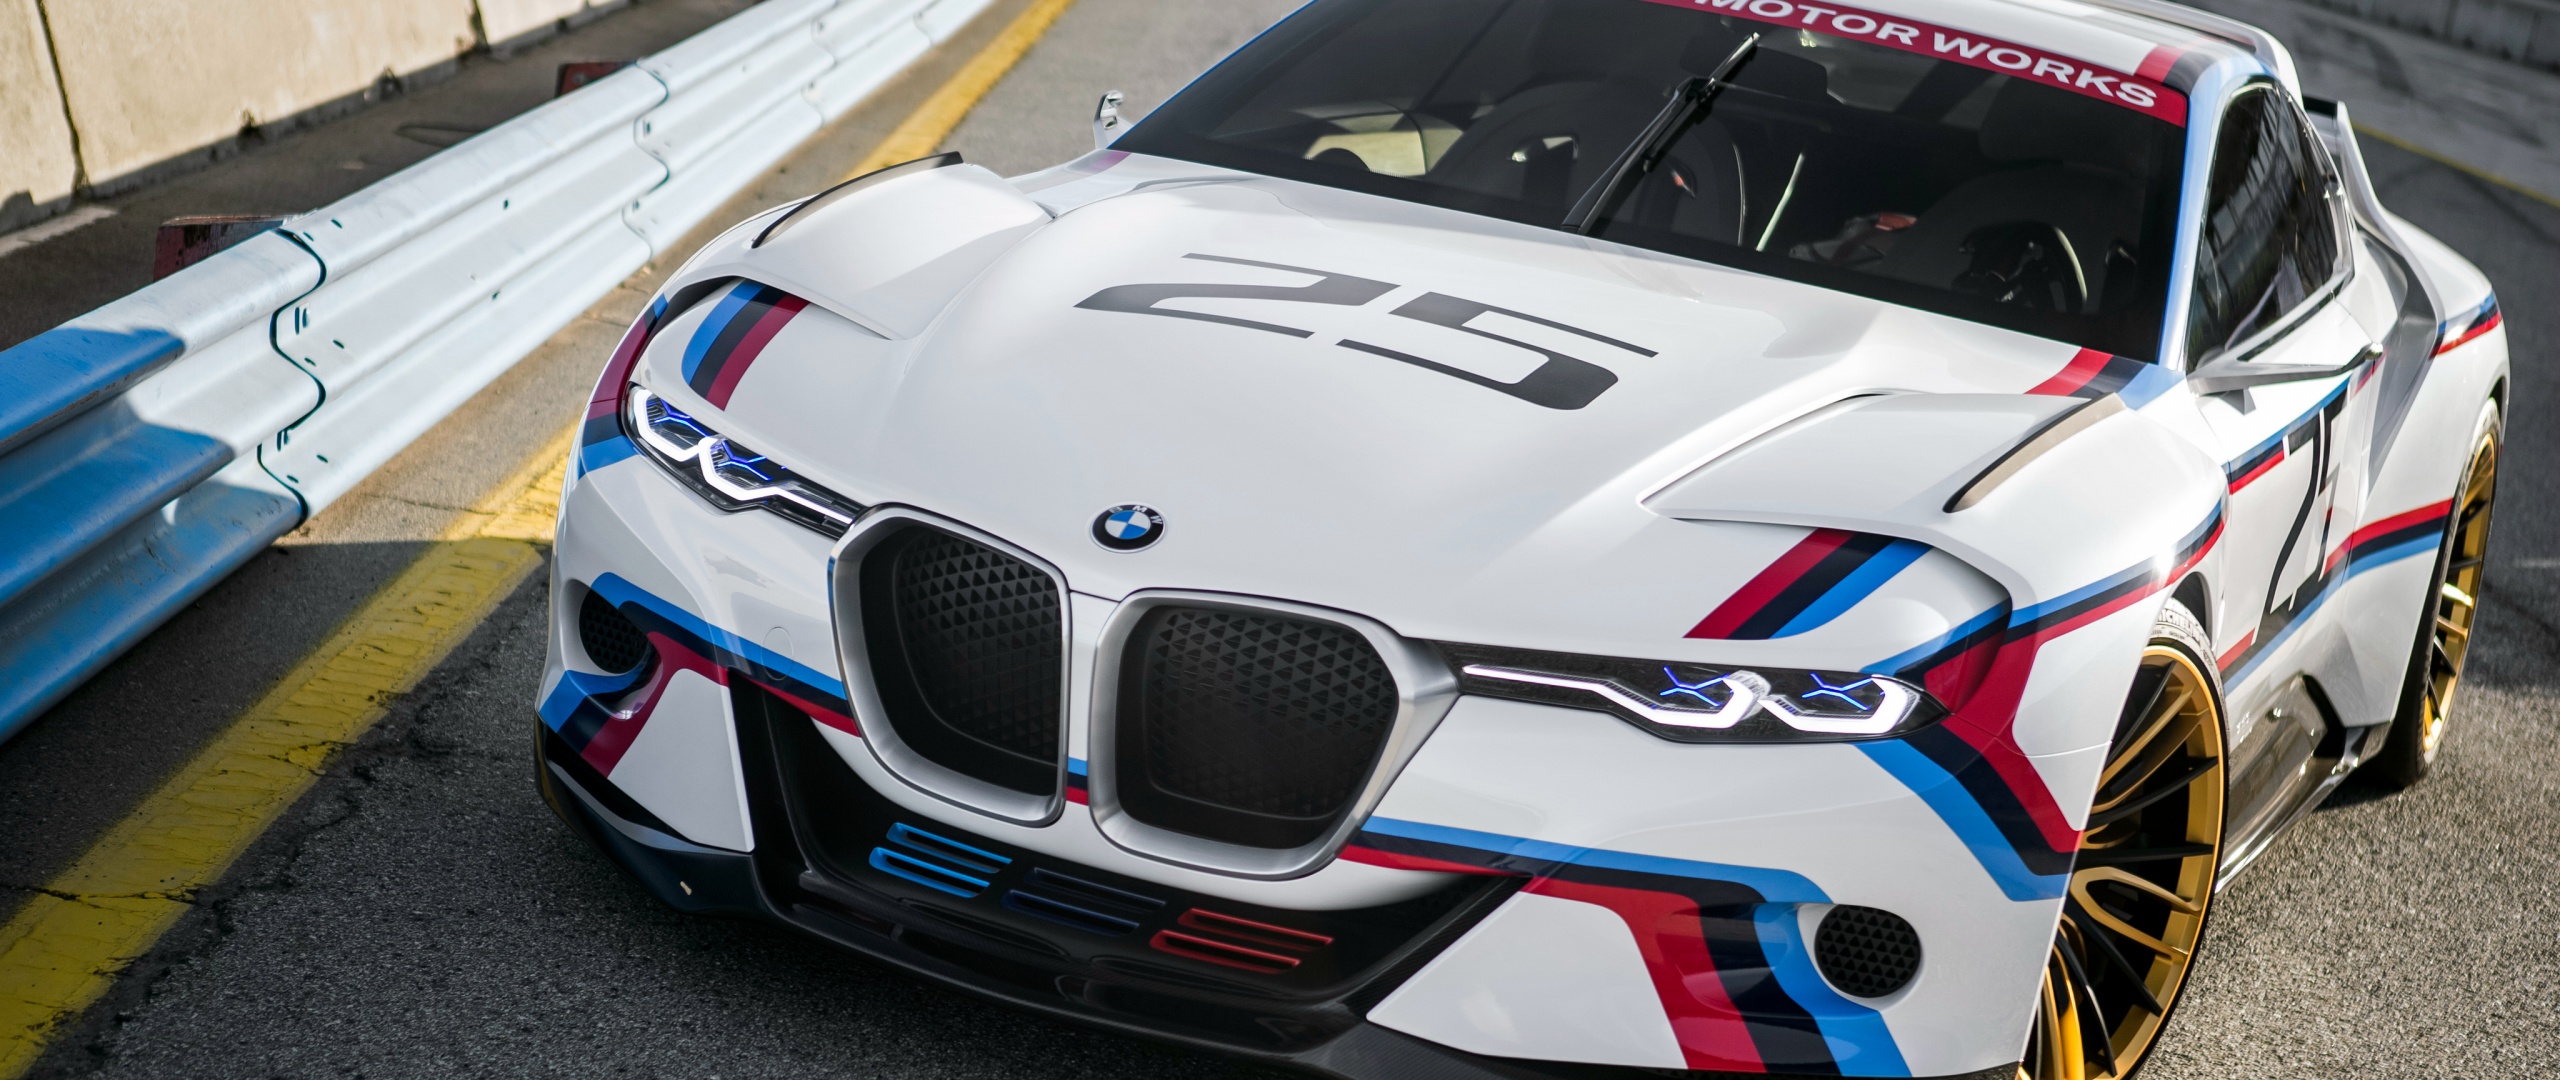 Bmw 3 0 Csl Hommage R Wallpaper 4k Racing Cars Supercars Cars 1208